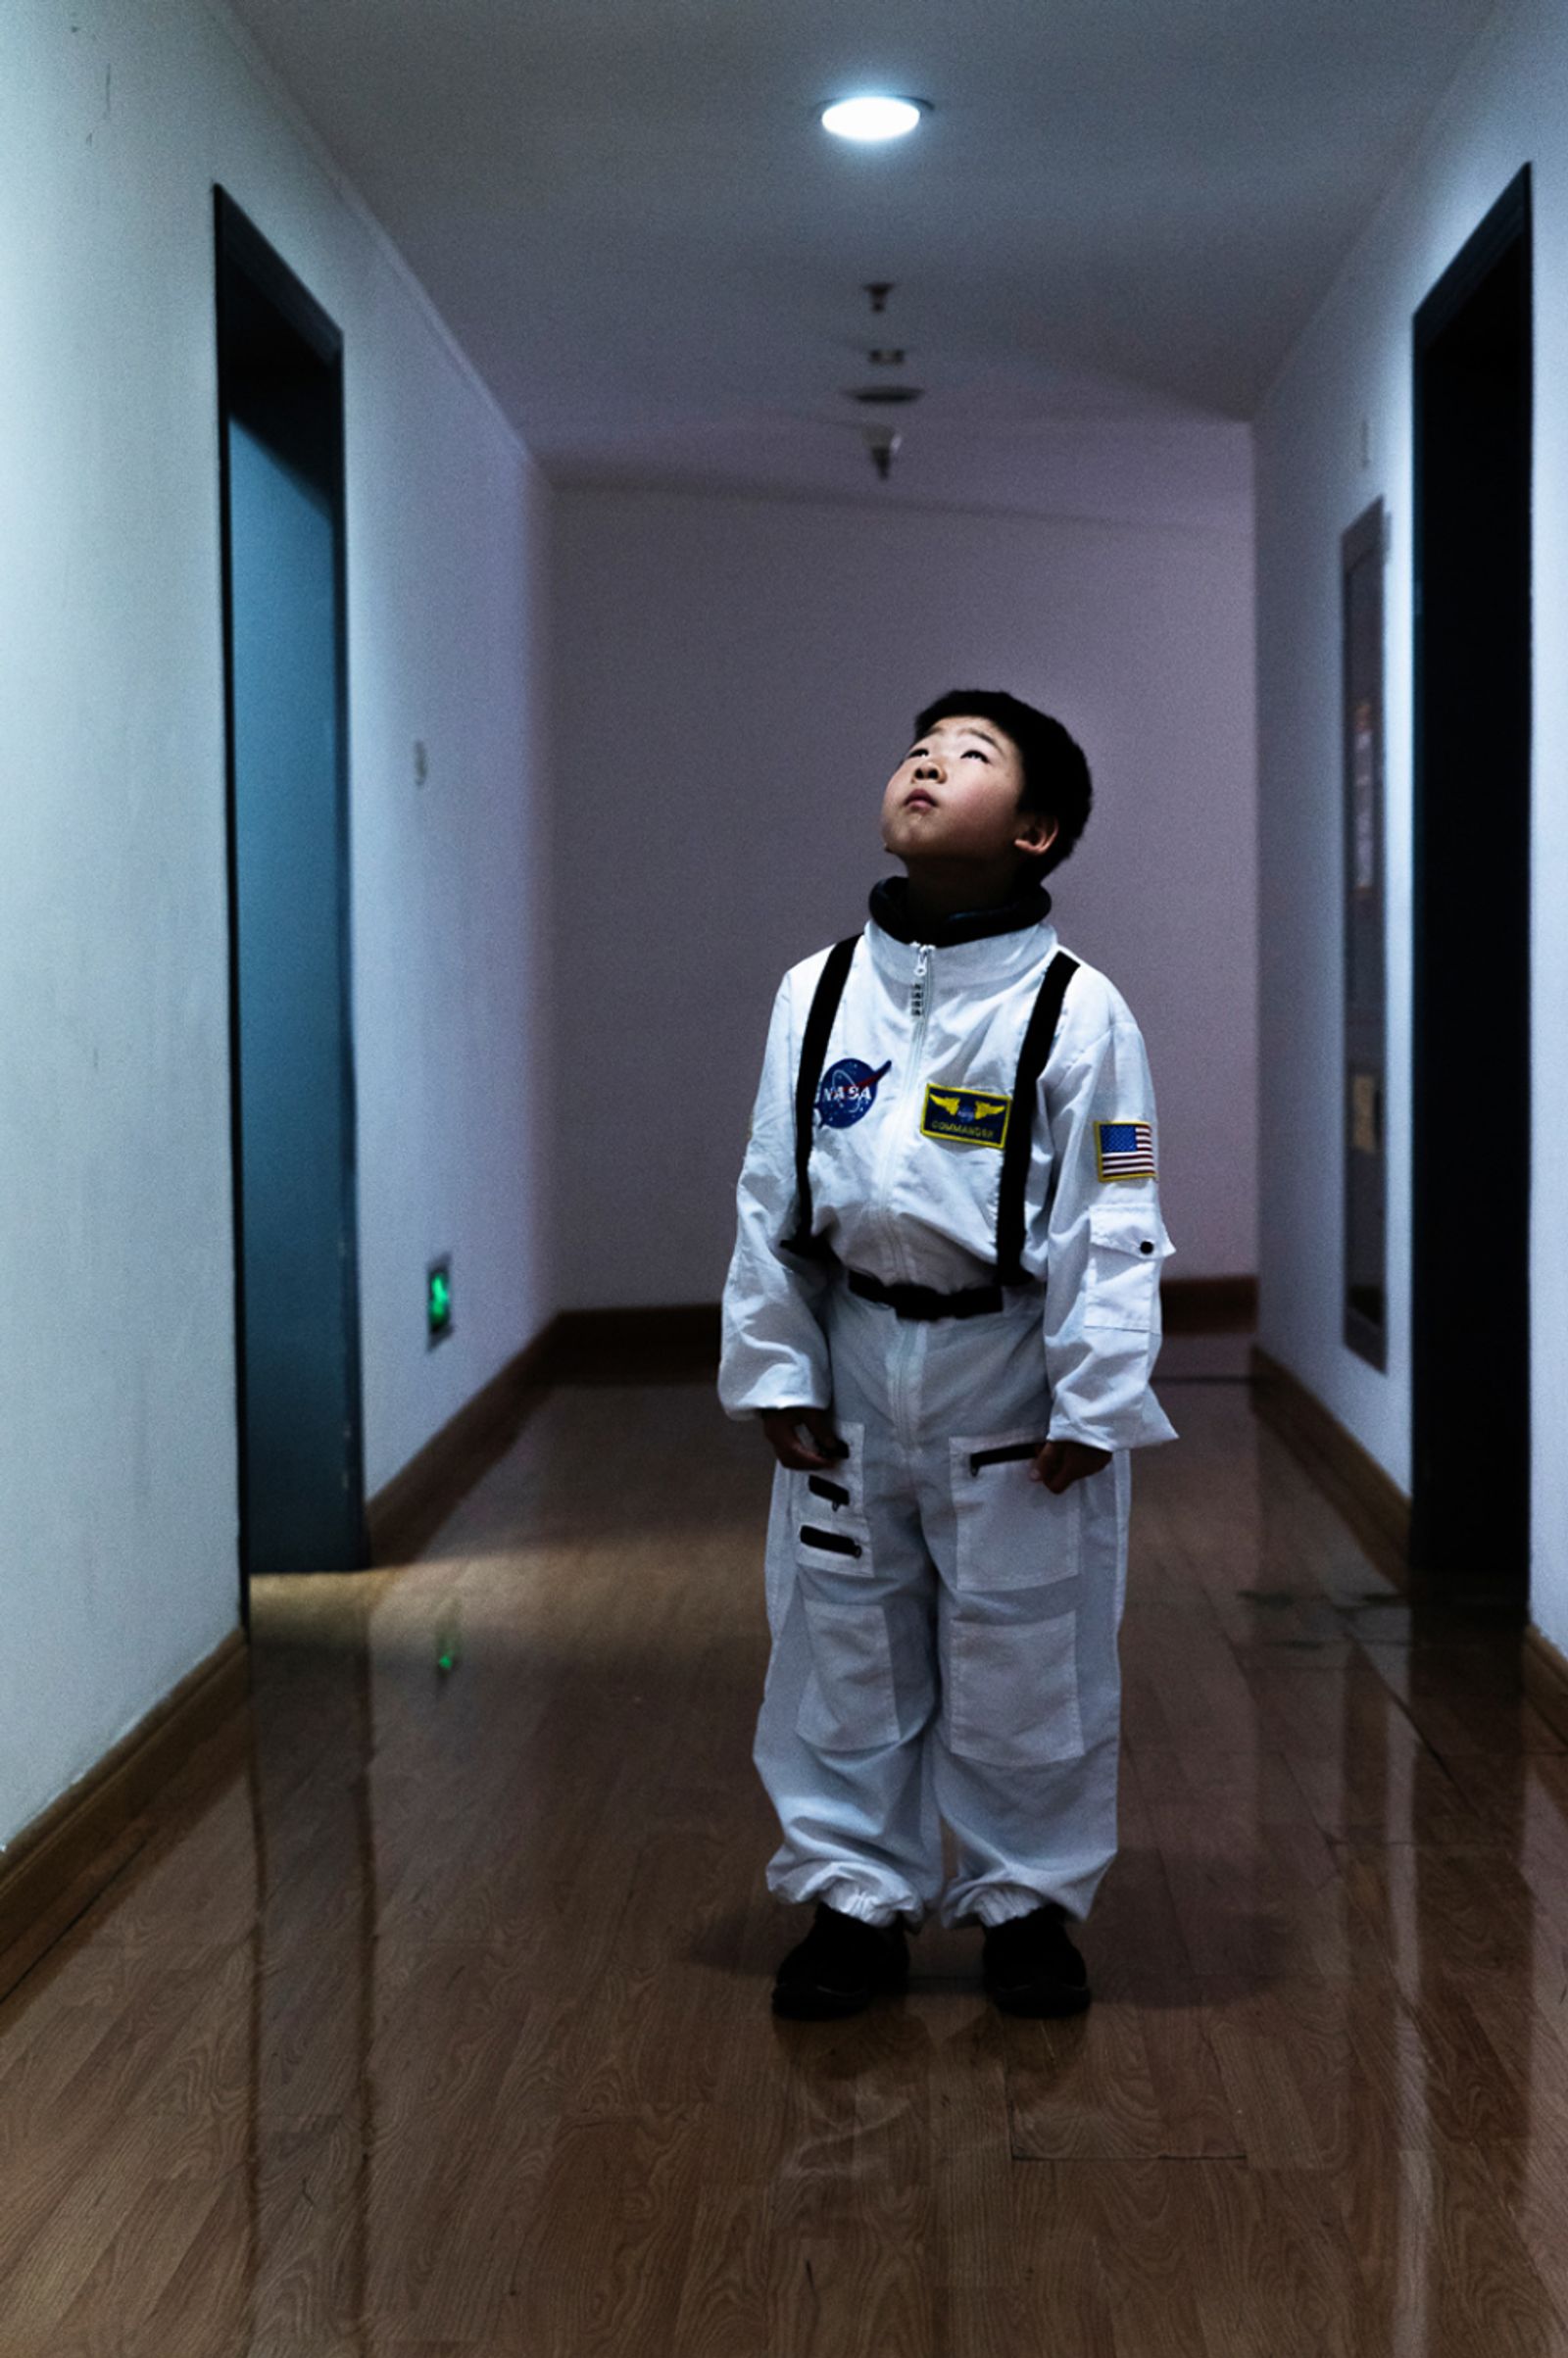 © Matjaz Tancic - A young boy at the Mars Society meeting at the observatory in Beijing, China.